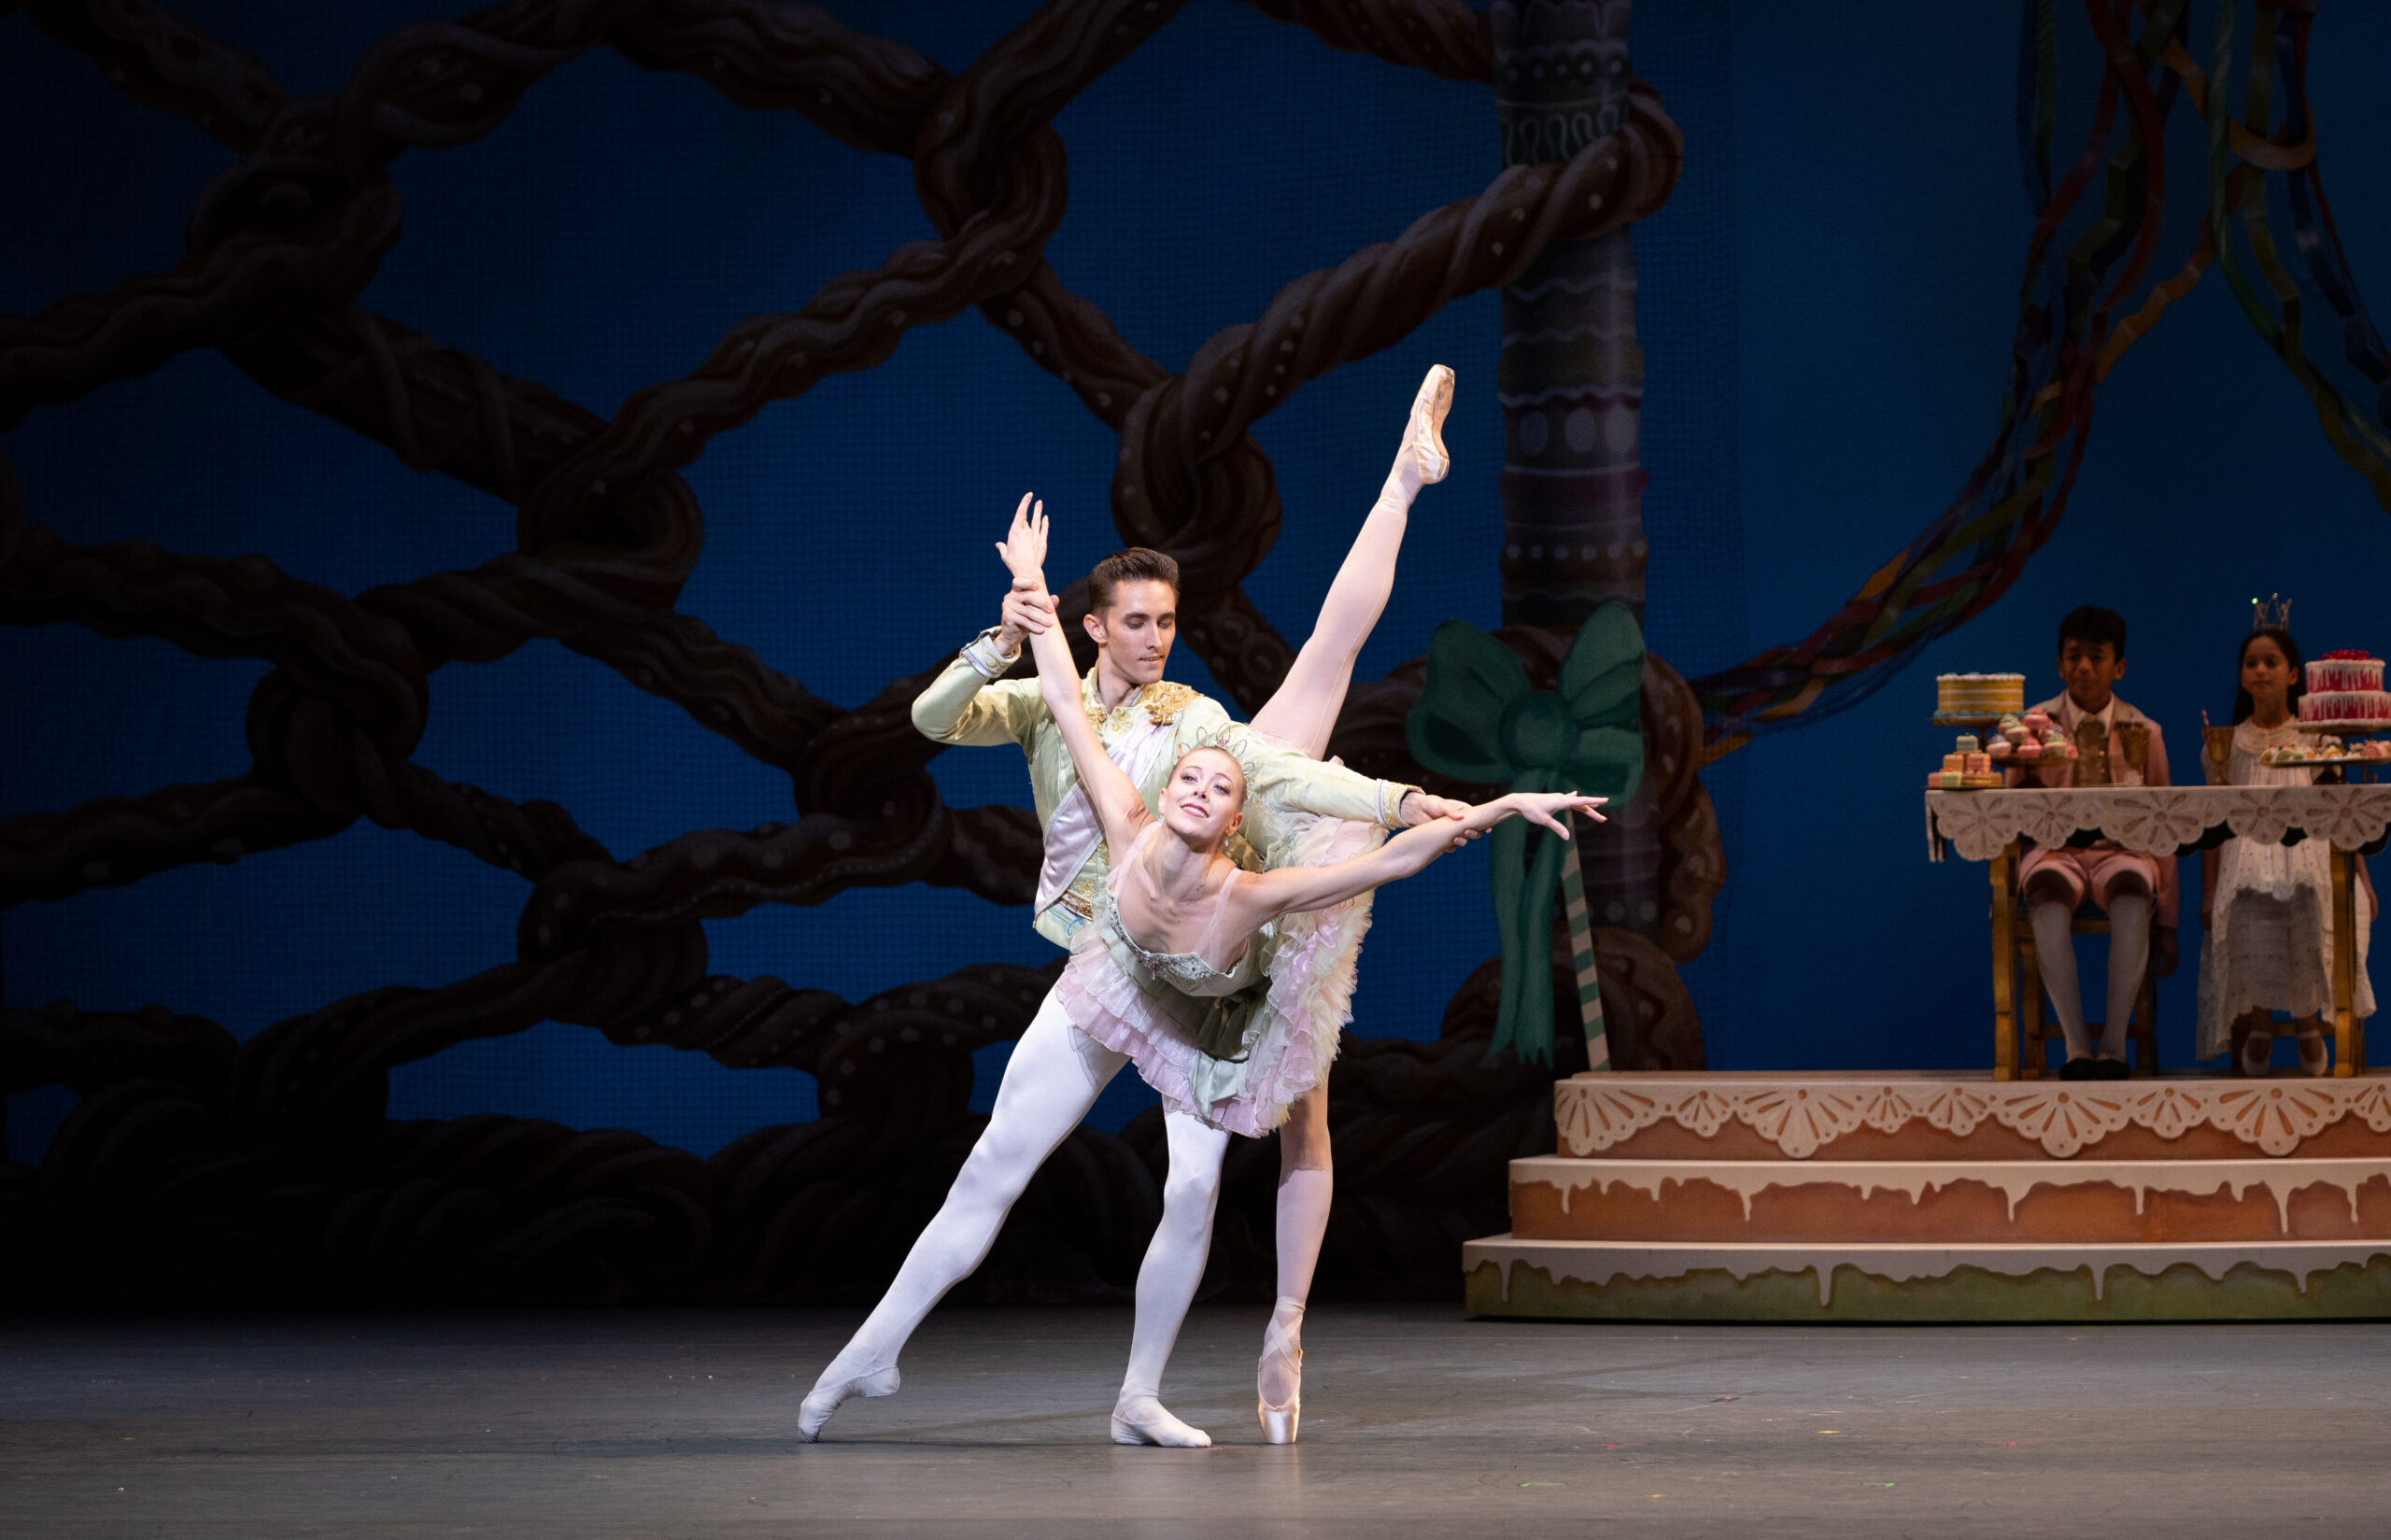 Dawn Atkins takes a deep penché arabesque in croisé on pointe with her right leg raised and her arms out to the side. Stanislav Olshanskyi stands behind her and slightly to her left in a tendu second, holding onto her wrists to help support her. Atkins wears a mint green tutu with a pink skirt, while Olshanskyi wears white tights and a mint green tunic. Behind them onstage, a boy and girl in costumes sit at a table piled with sweets and cakes, watching.